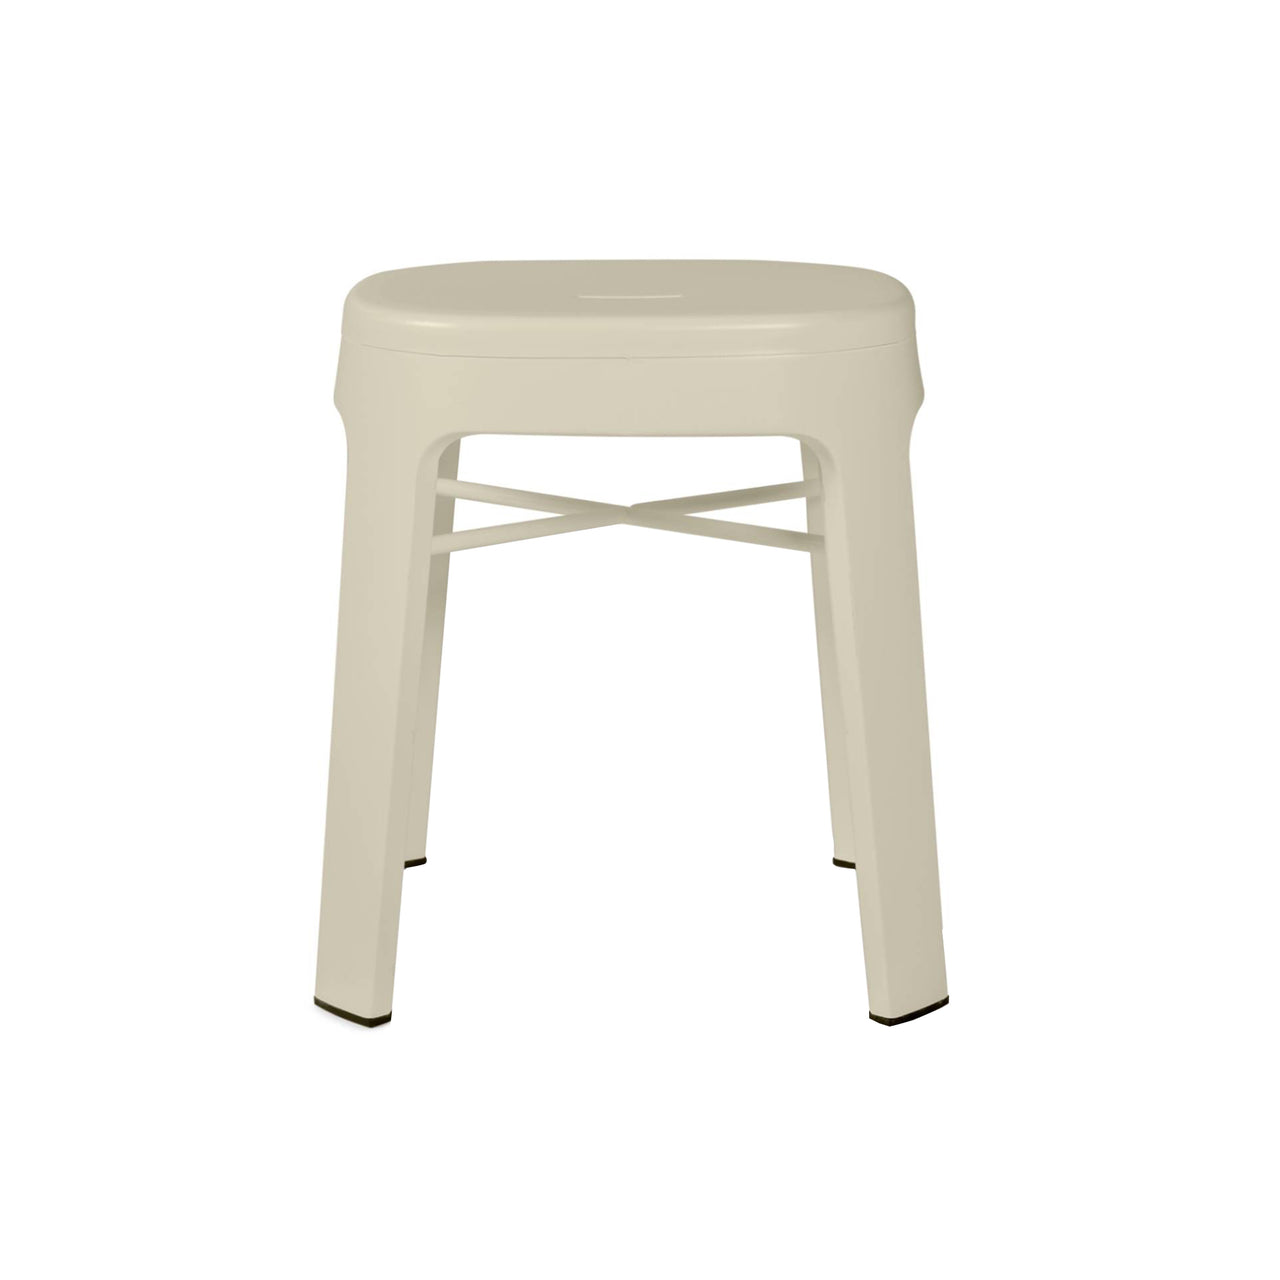 Ombra Stool: Stacking + Grey